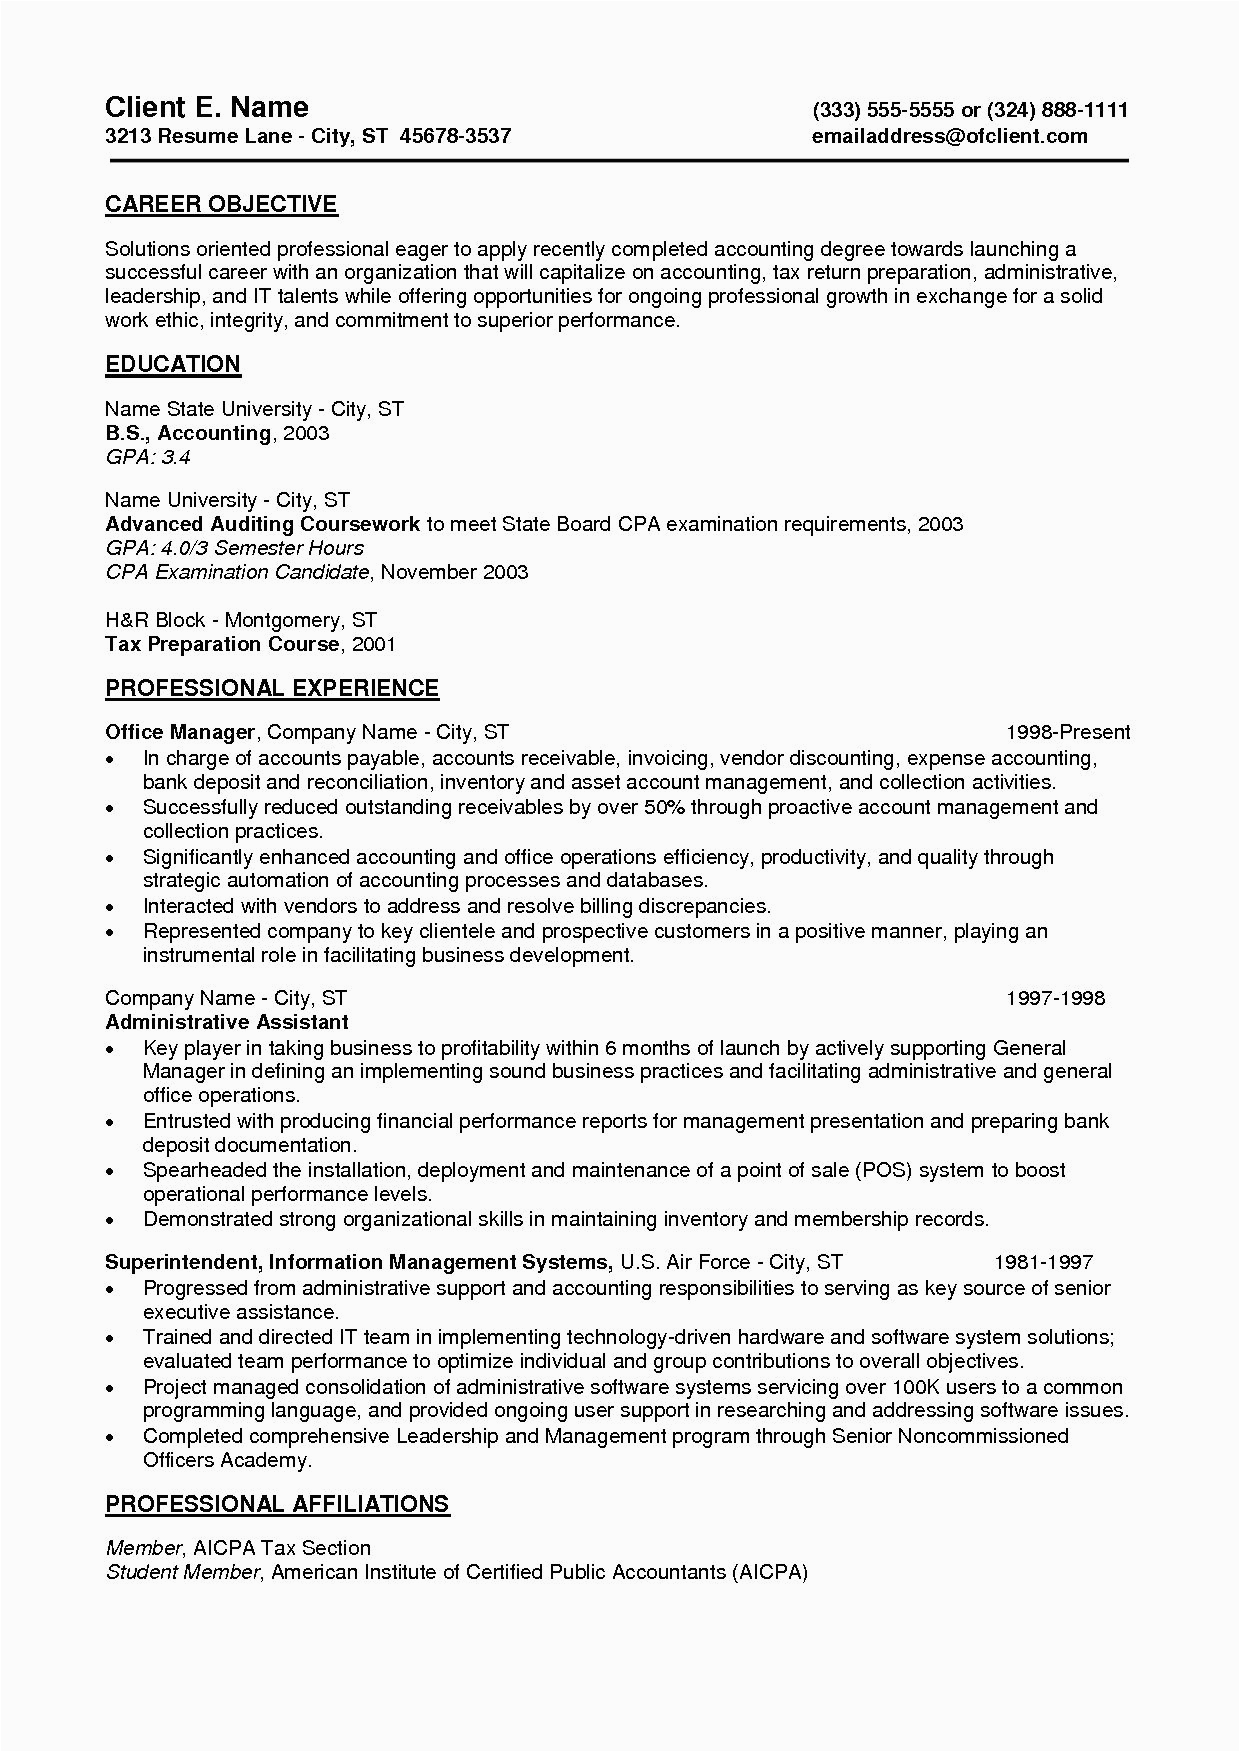 Sample Resume Objective Statements Entry Level Entry Level Resume Example Entry Level Job Resume Examples